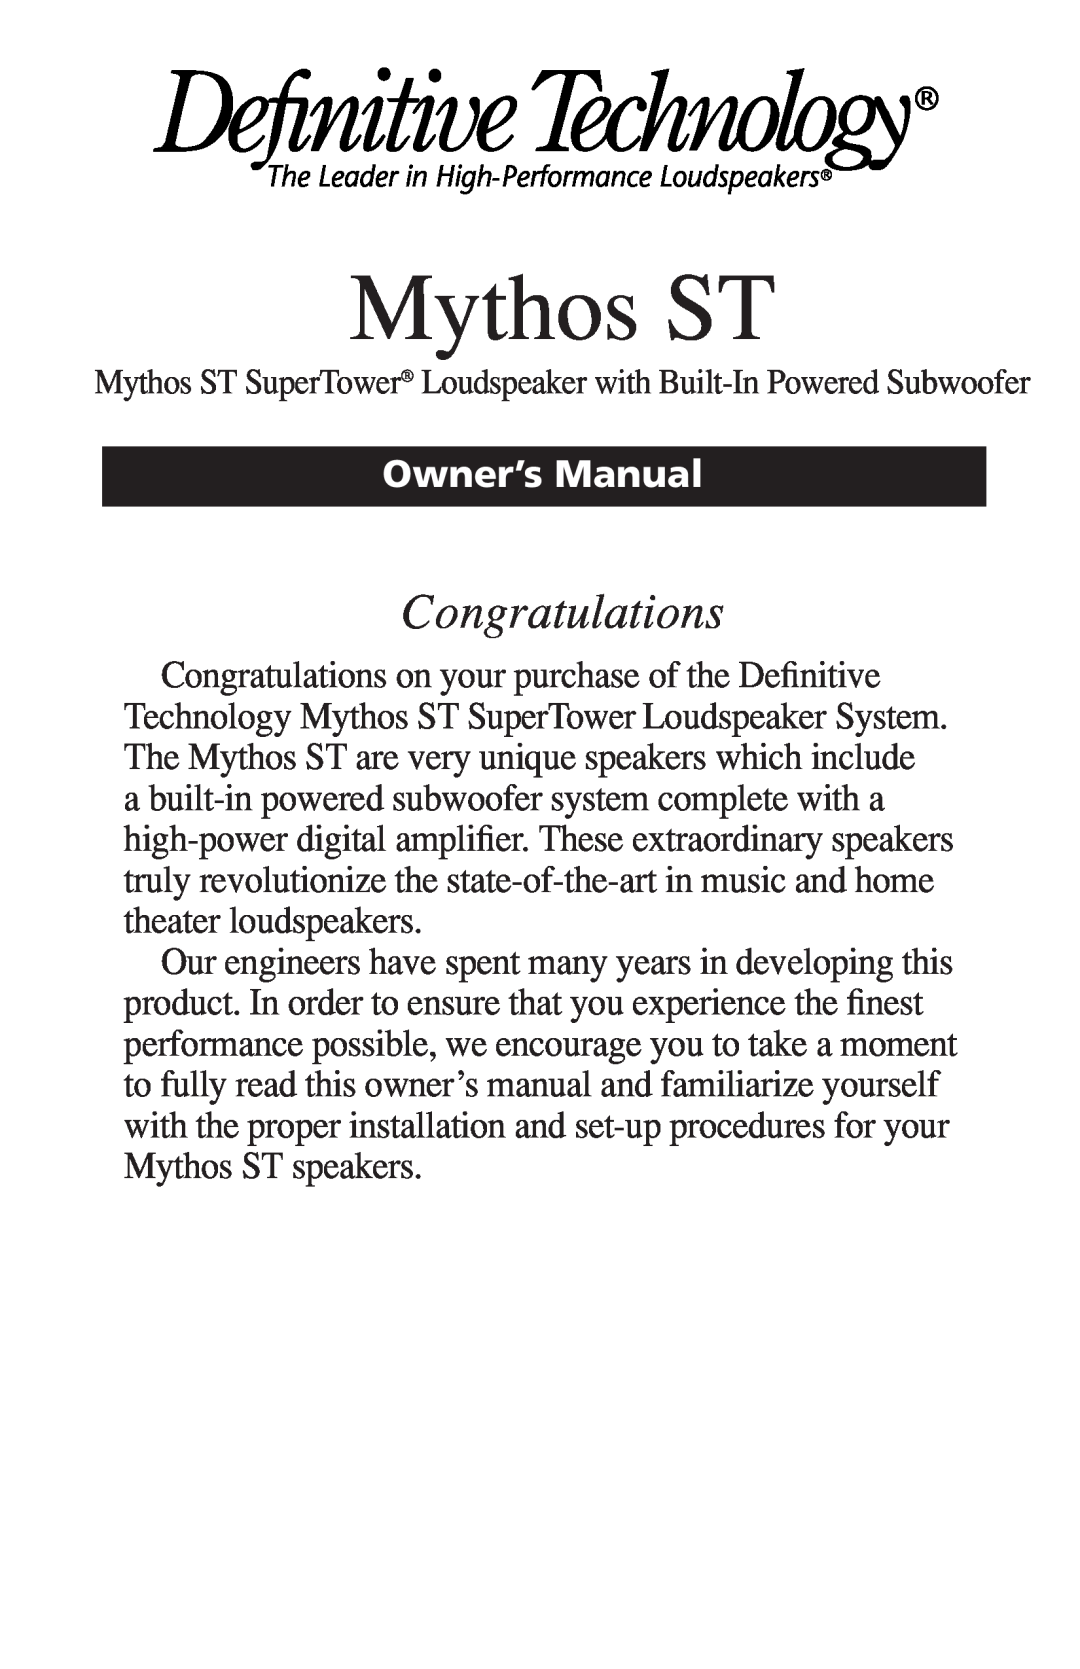 Definitive Technology DI55R owner manual Mythos ST, Congratulations 